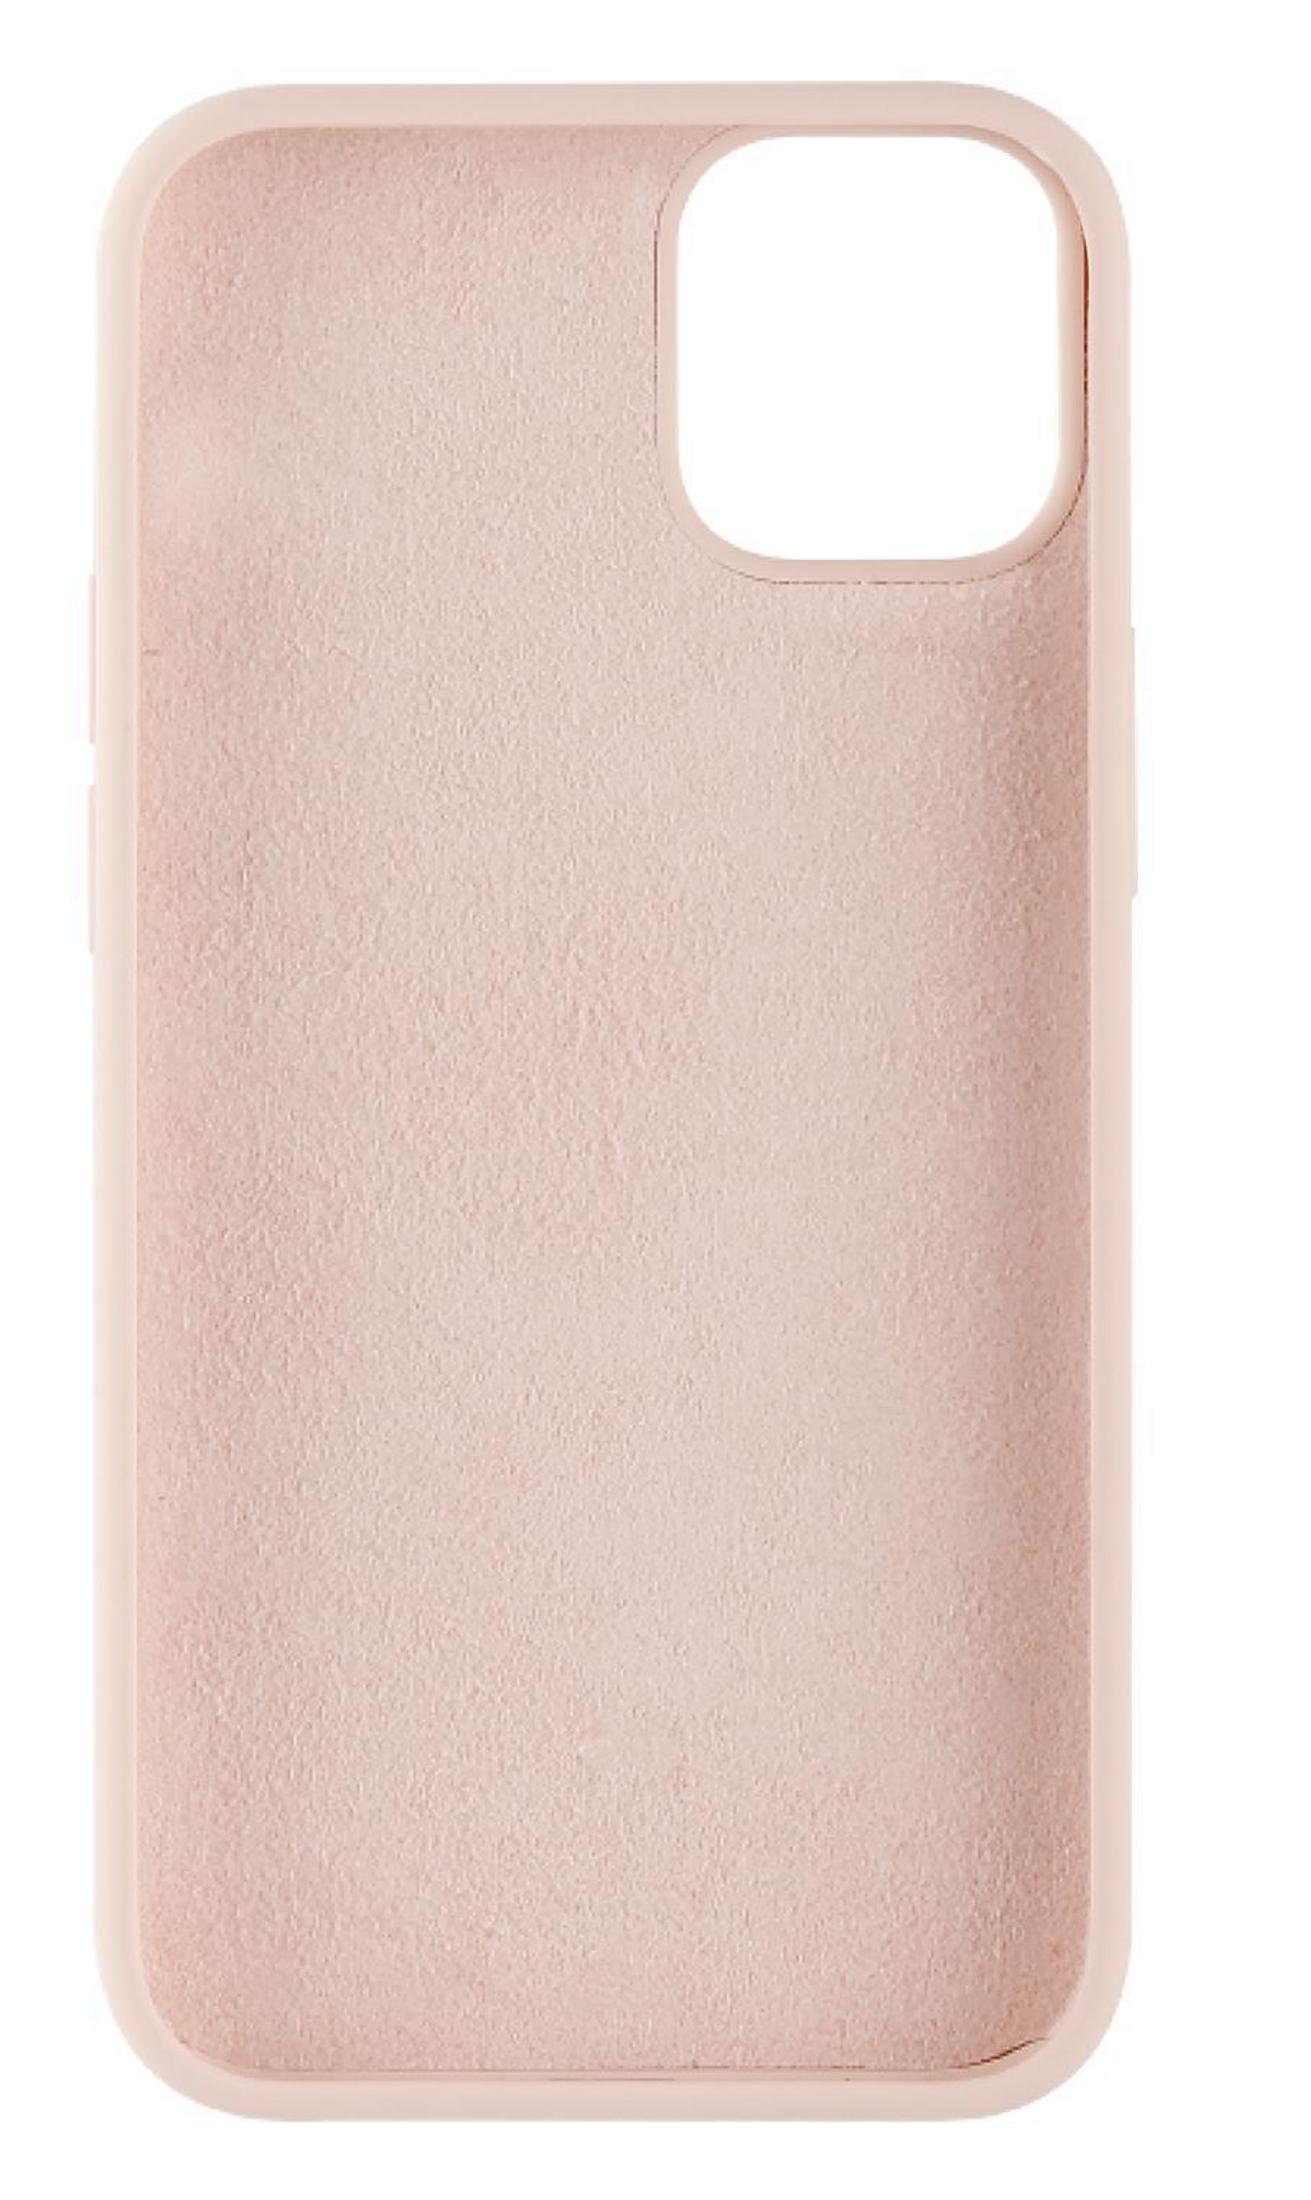 VIVANCO 62856 HYPE COVER Pink-Sand PS, iPhone 13, Apple, IPH13 Backcover